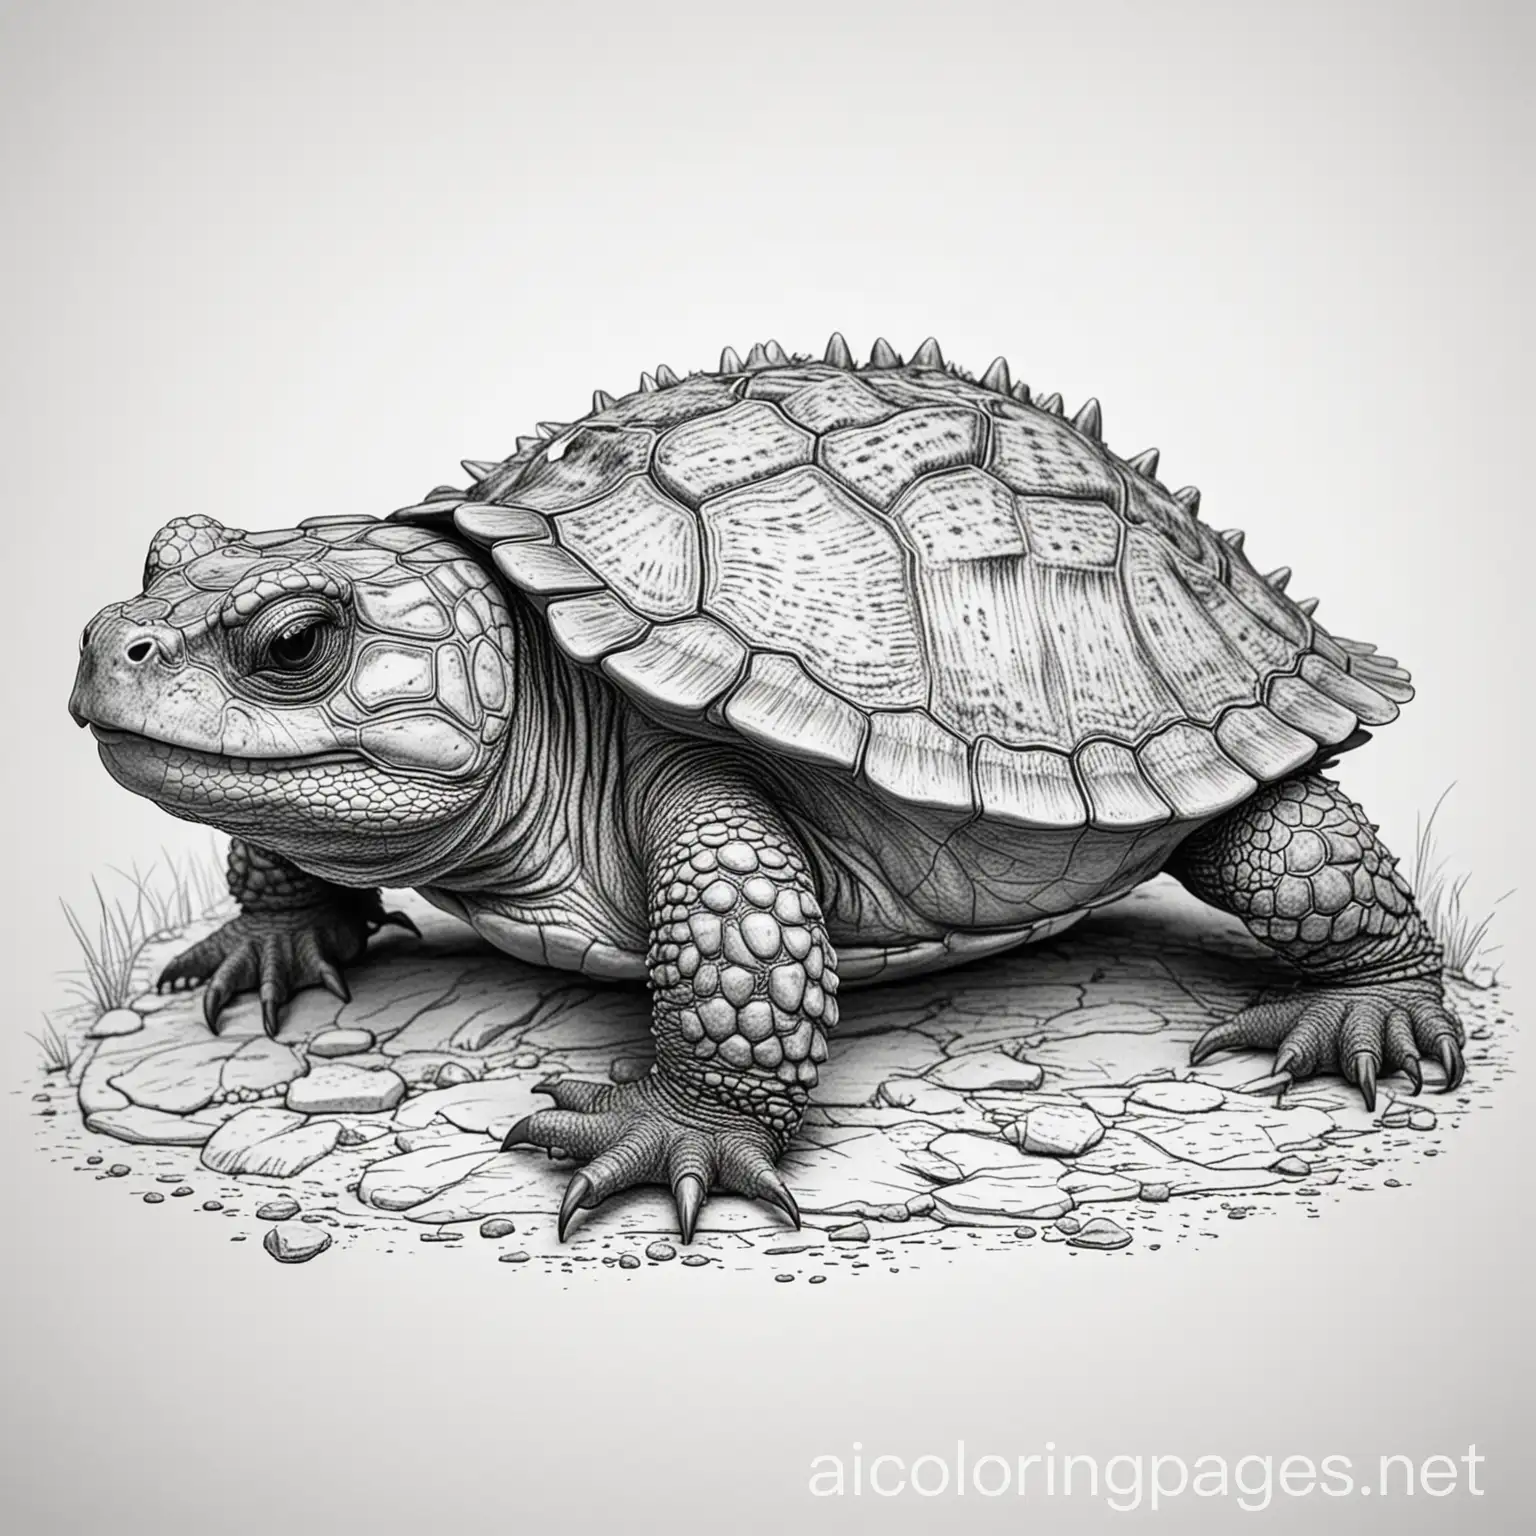 Baby alligator Snapping turtle, love,, Coloring Page, black and white, line art, white background, Simplicity, Ample White Space. The background of the coloring page is plain white to make it easy for young children to color within the lines. The outlines of all the subjects are easy to distinguish, making it simple for kids to color without too much difficulty